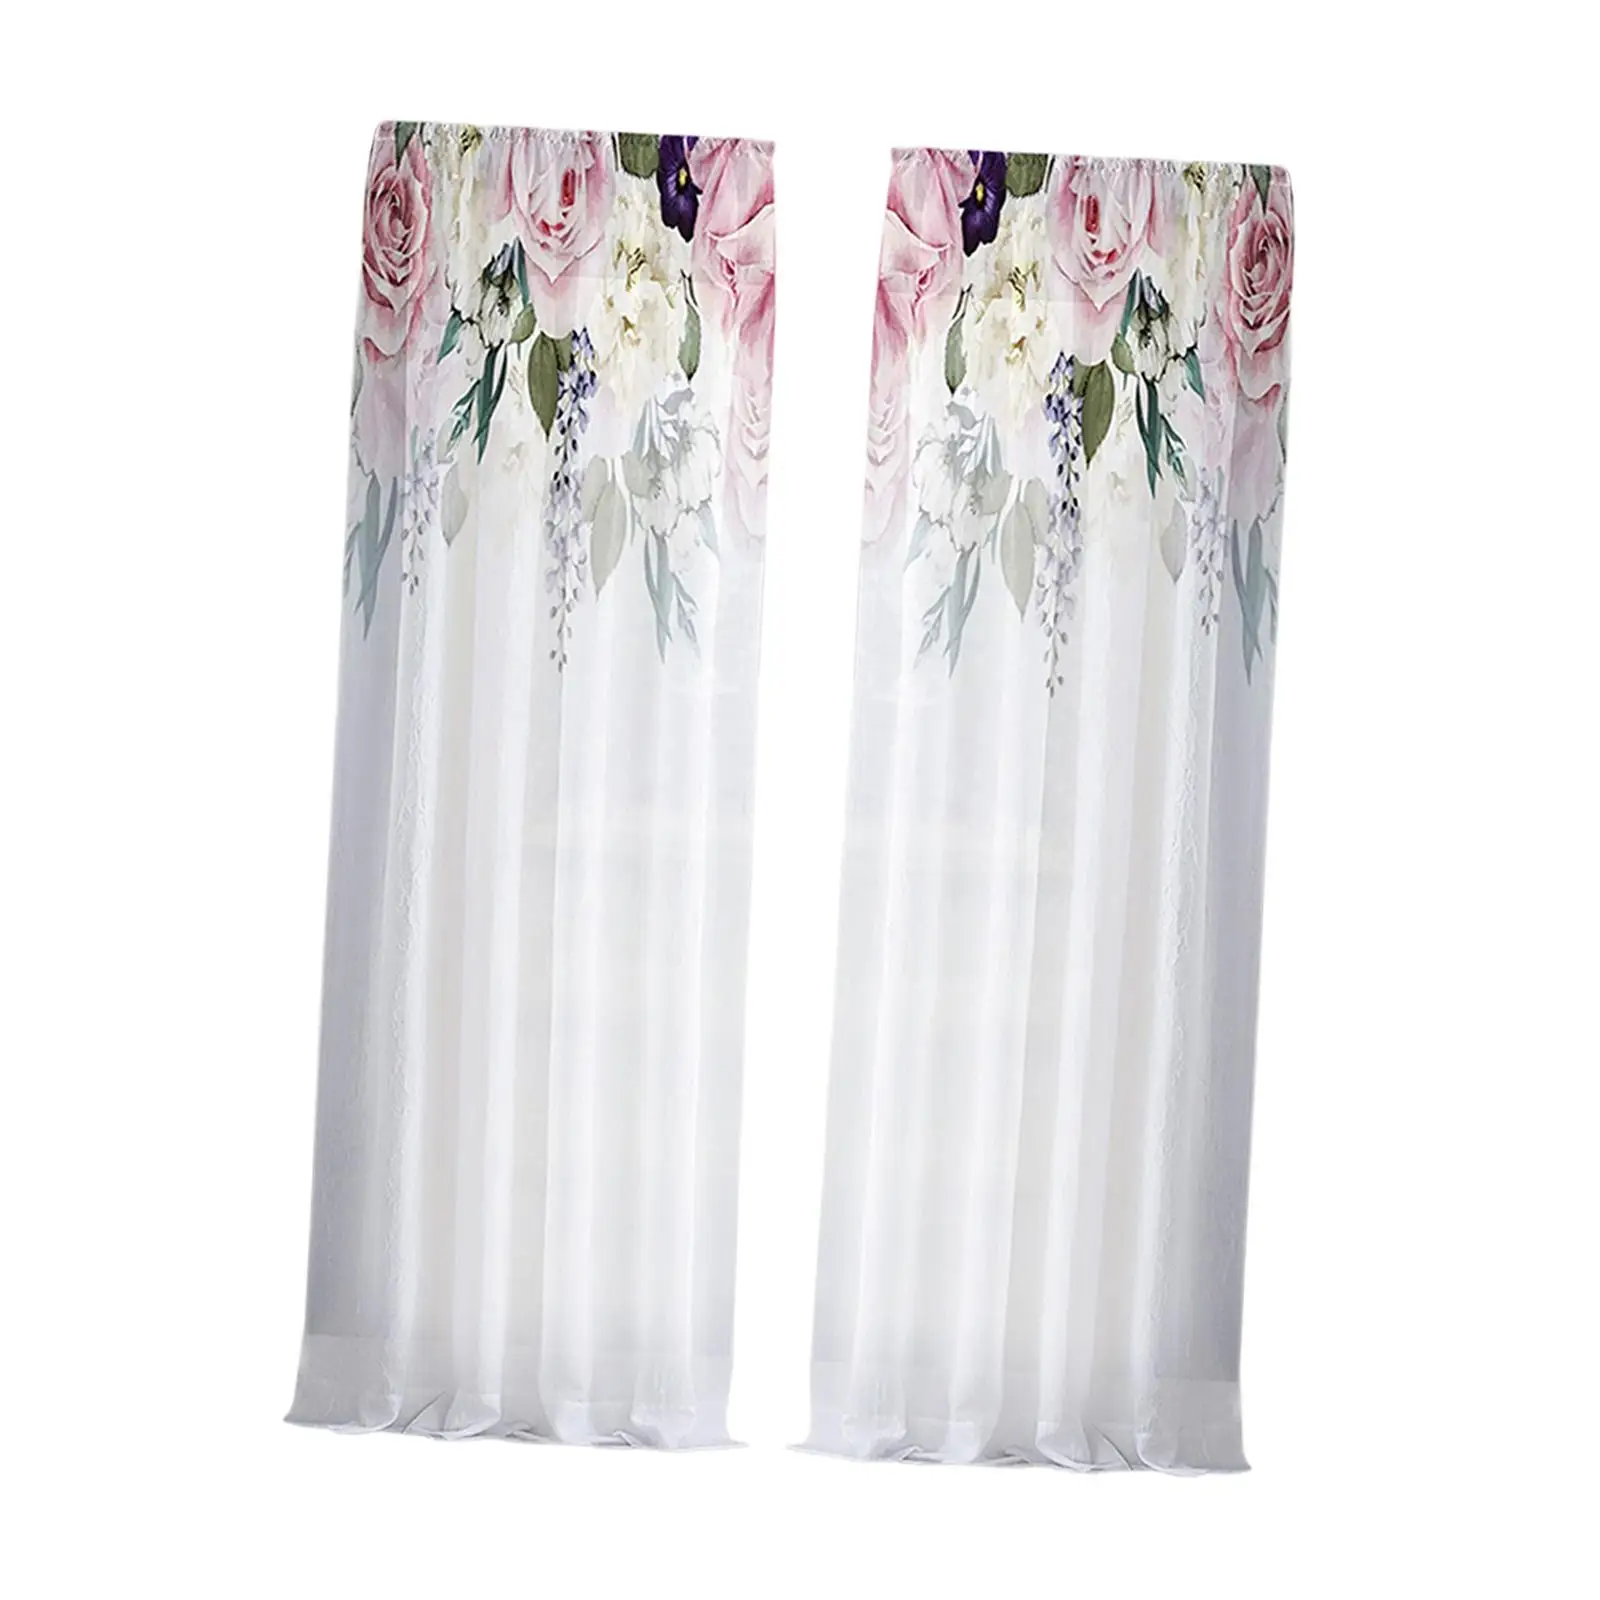 Pink Flowers Print Sheer Curtains Drapes Accessories Durable Polyester Fabric Decorative Two Panels Grommet Top for Living Room